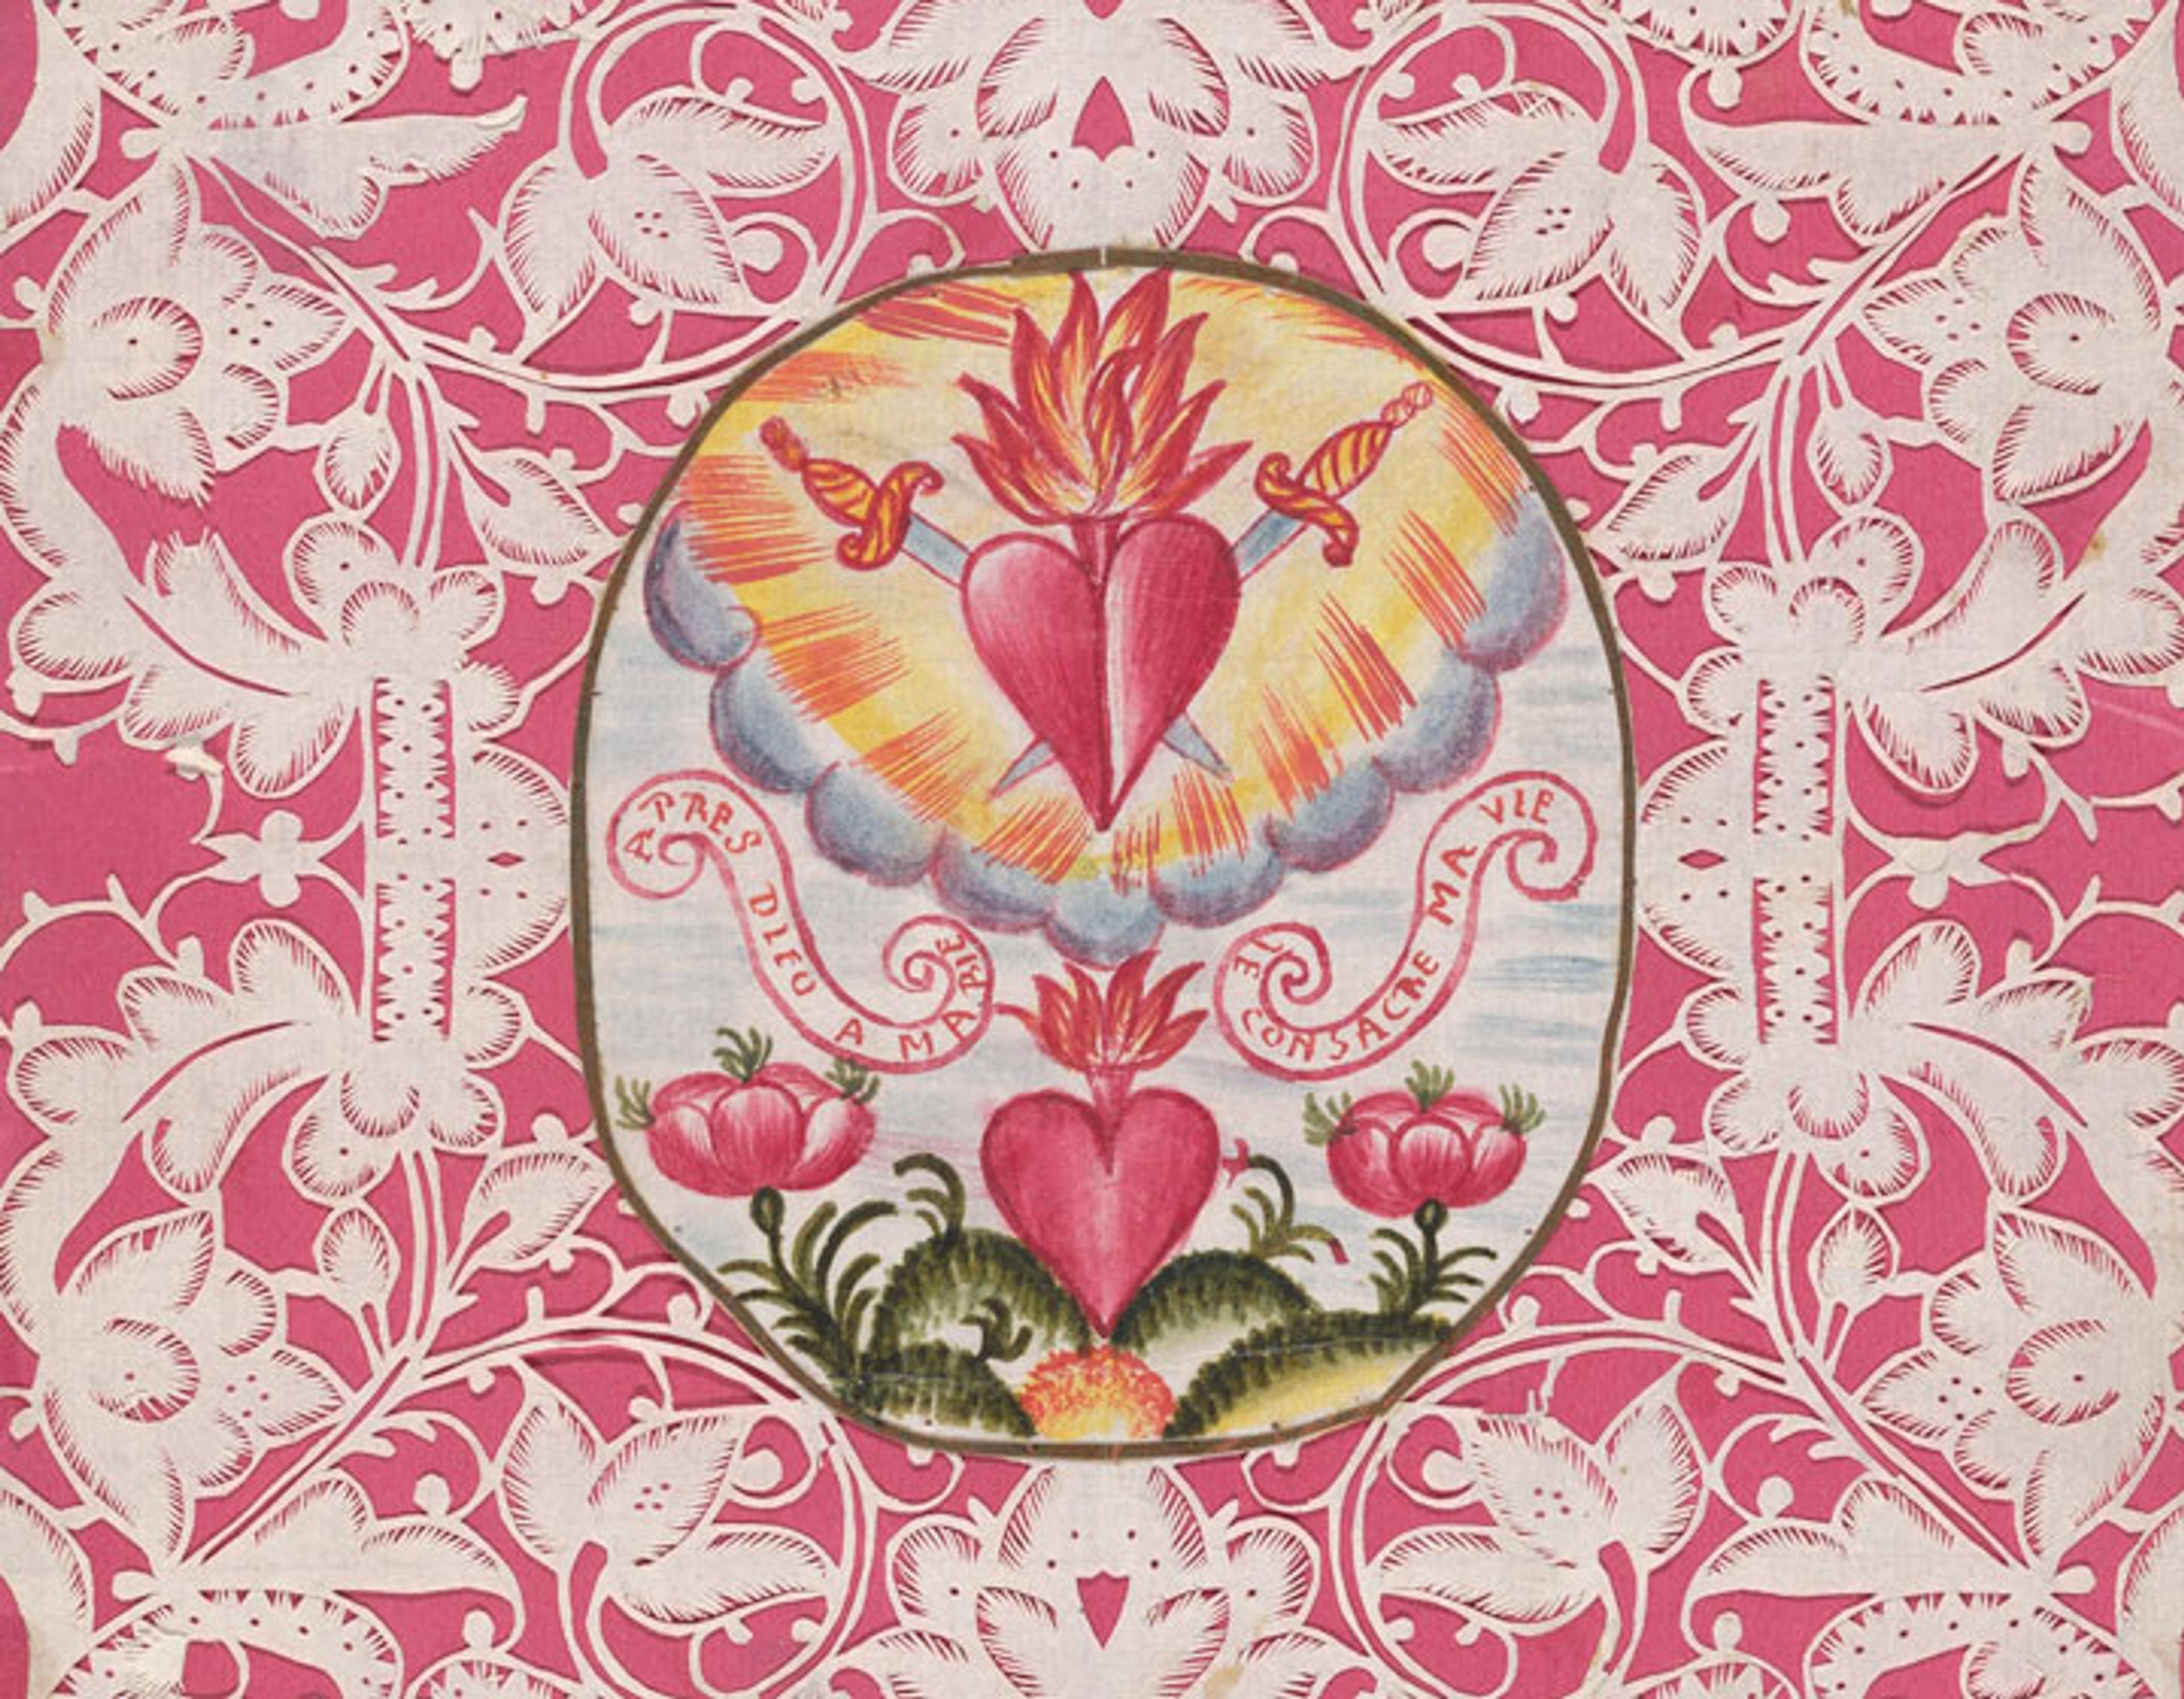 Detail of an 18th-century valentine with an image of hearts aflame